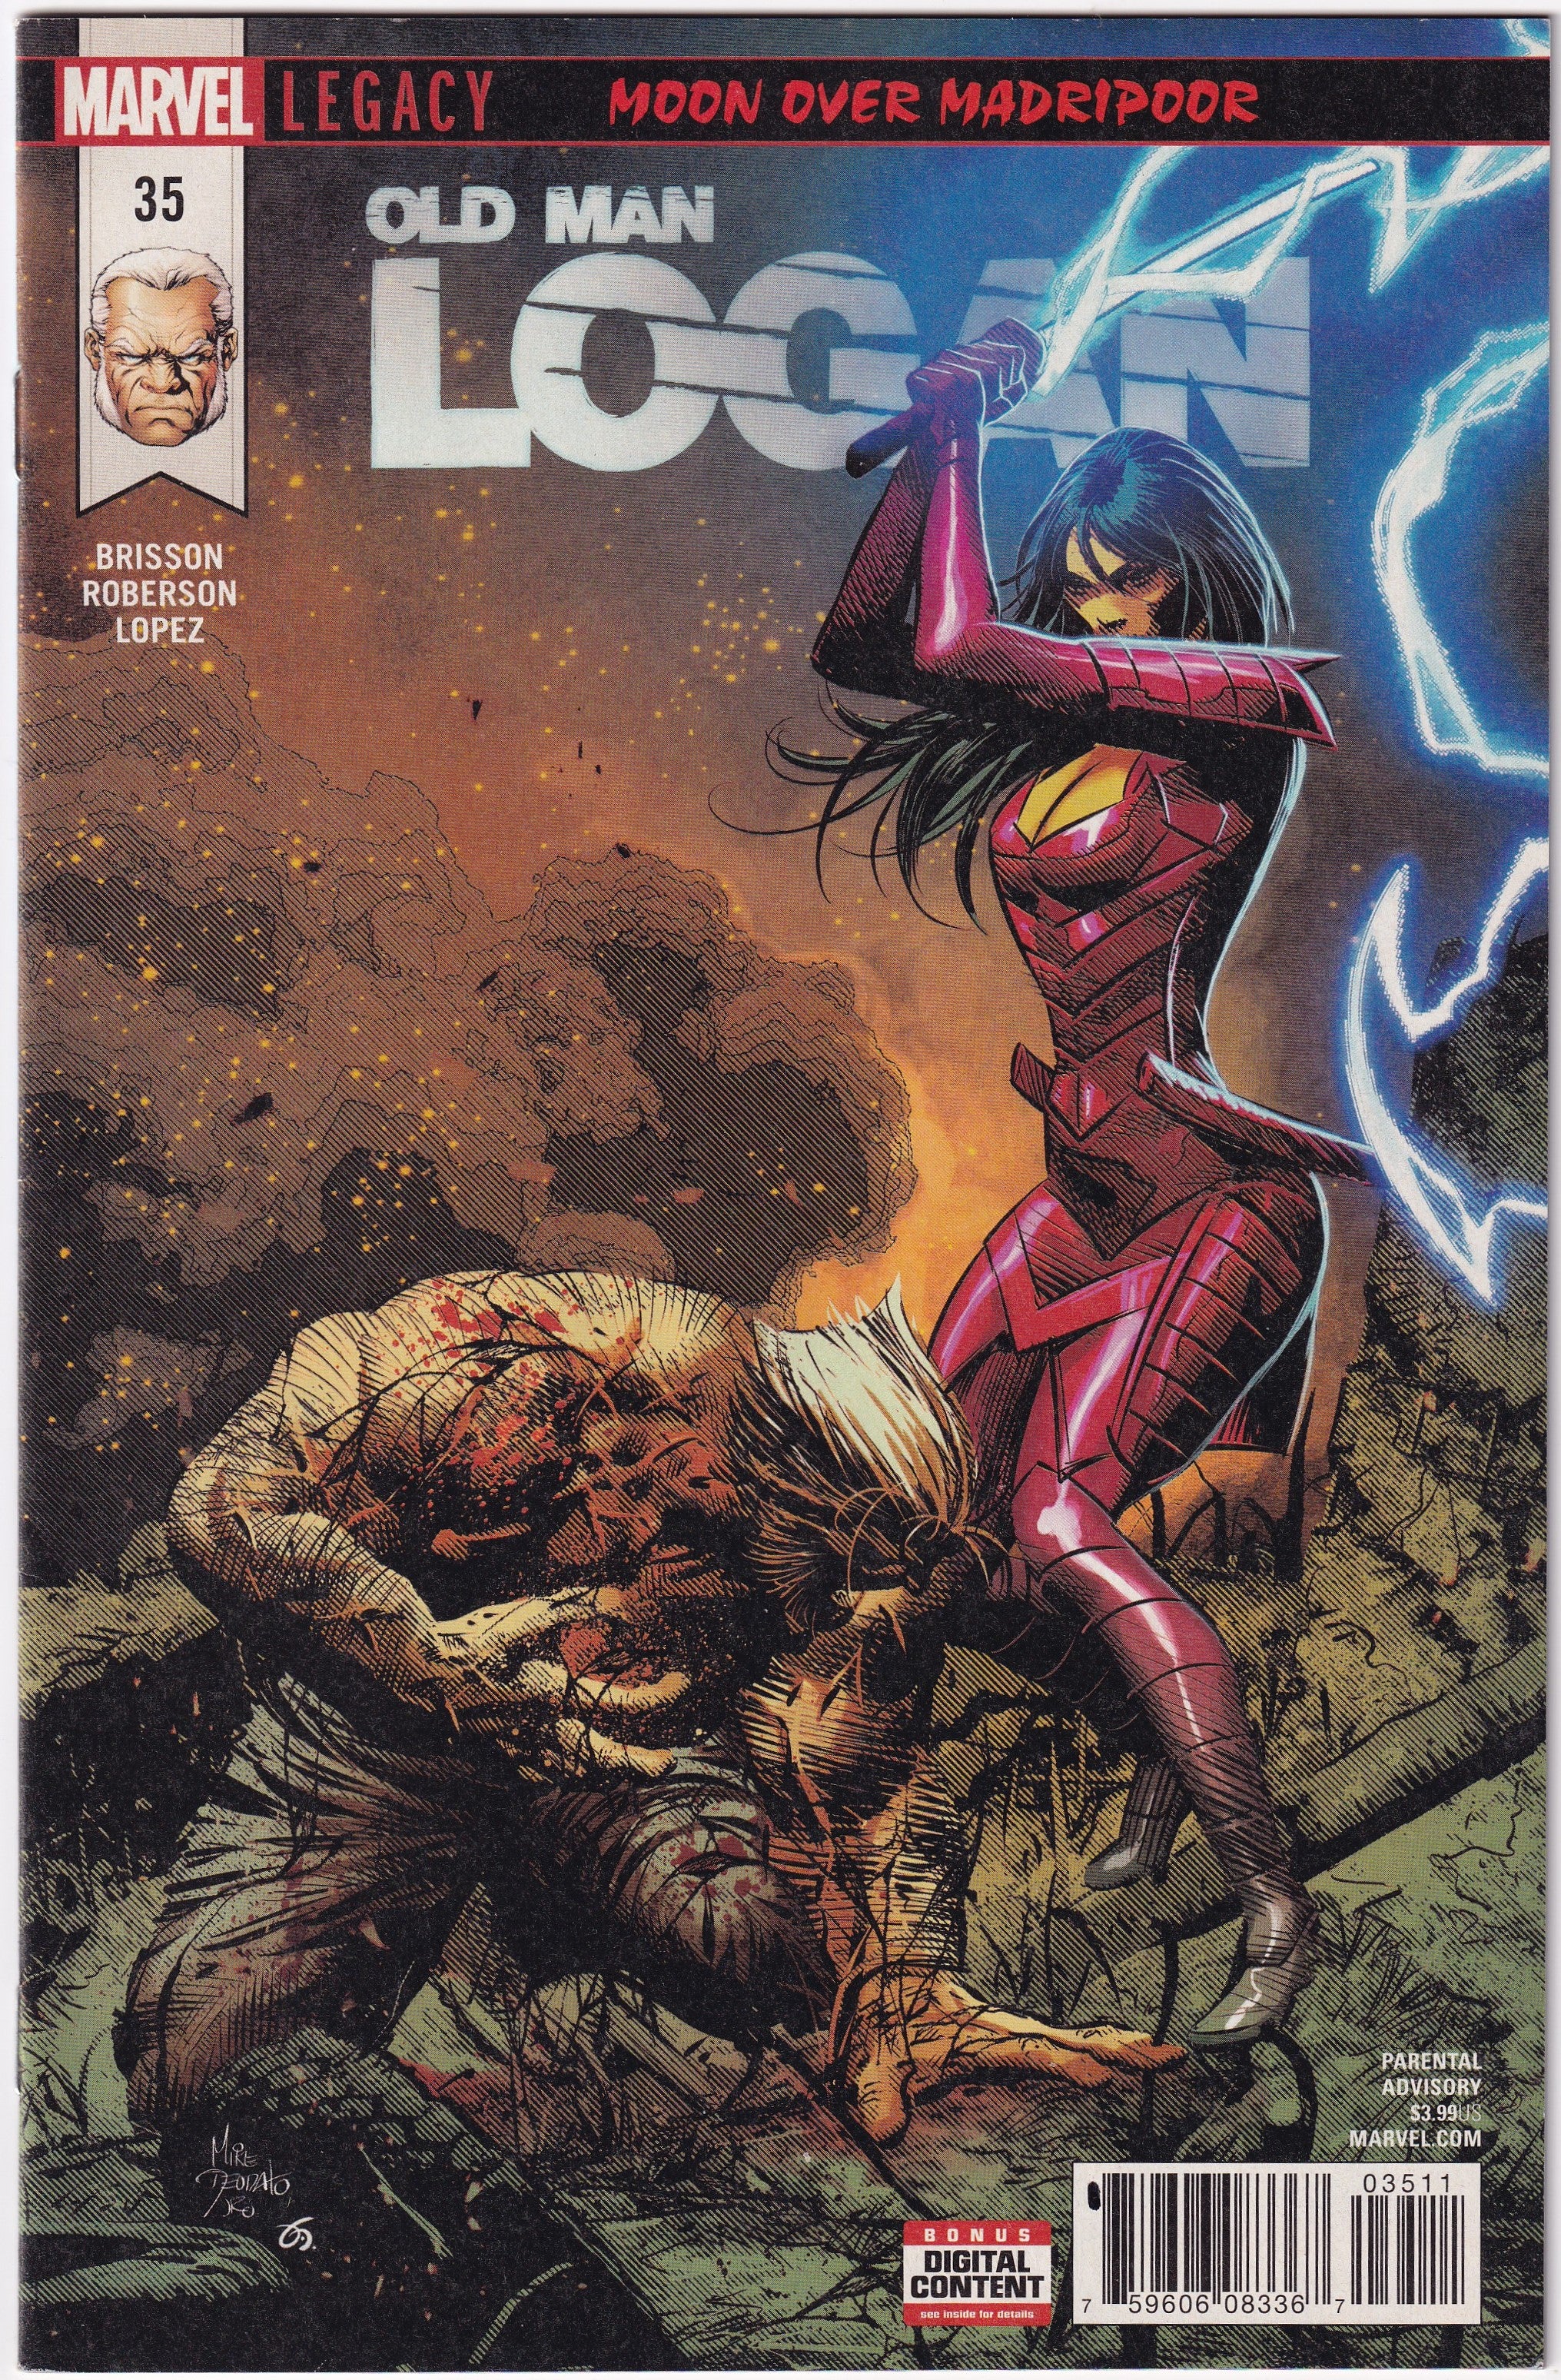 Photo of Old Man Logan V2 (18) 35A Ed Brisson, Ibraim Roberson Comic sold by Stronghold Collectibles